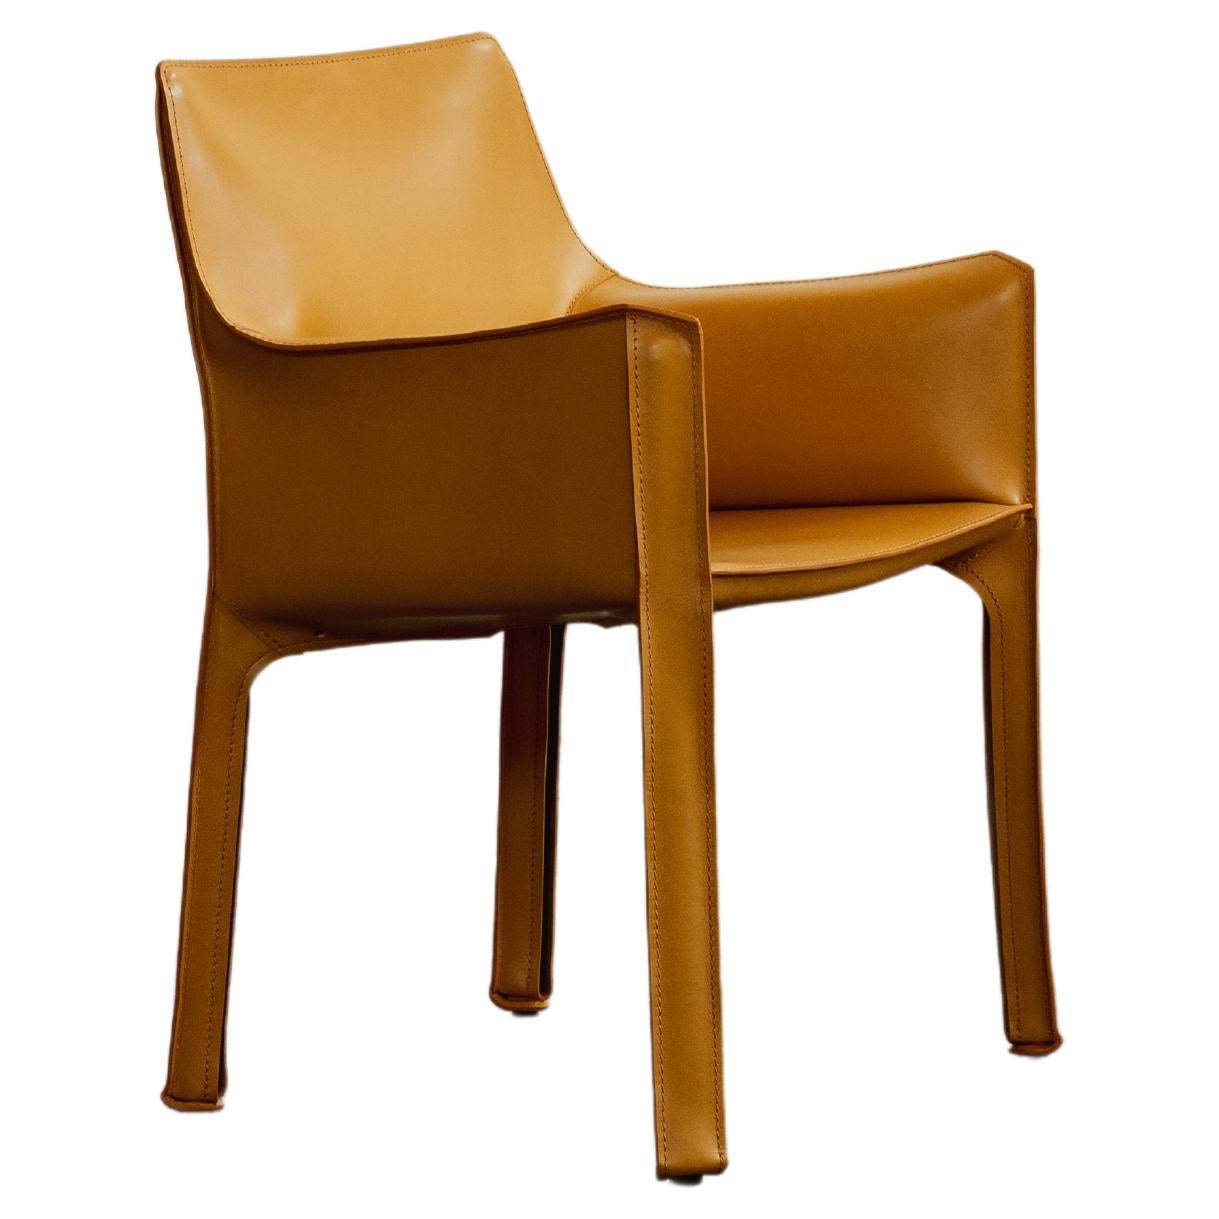 Mario Bellini "CAB 413" Chairs for Cassina in Yellow, 1977 For Sale